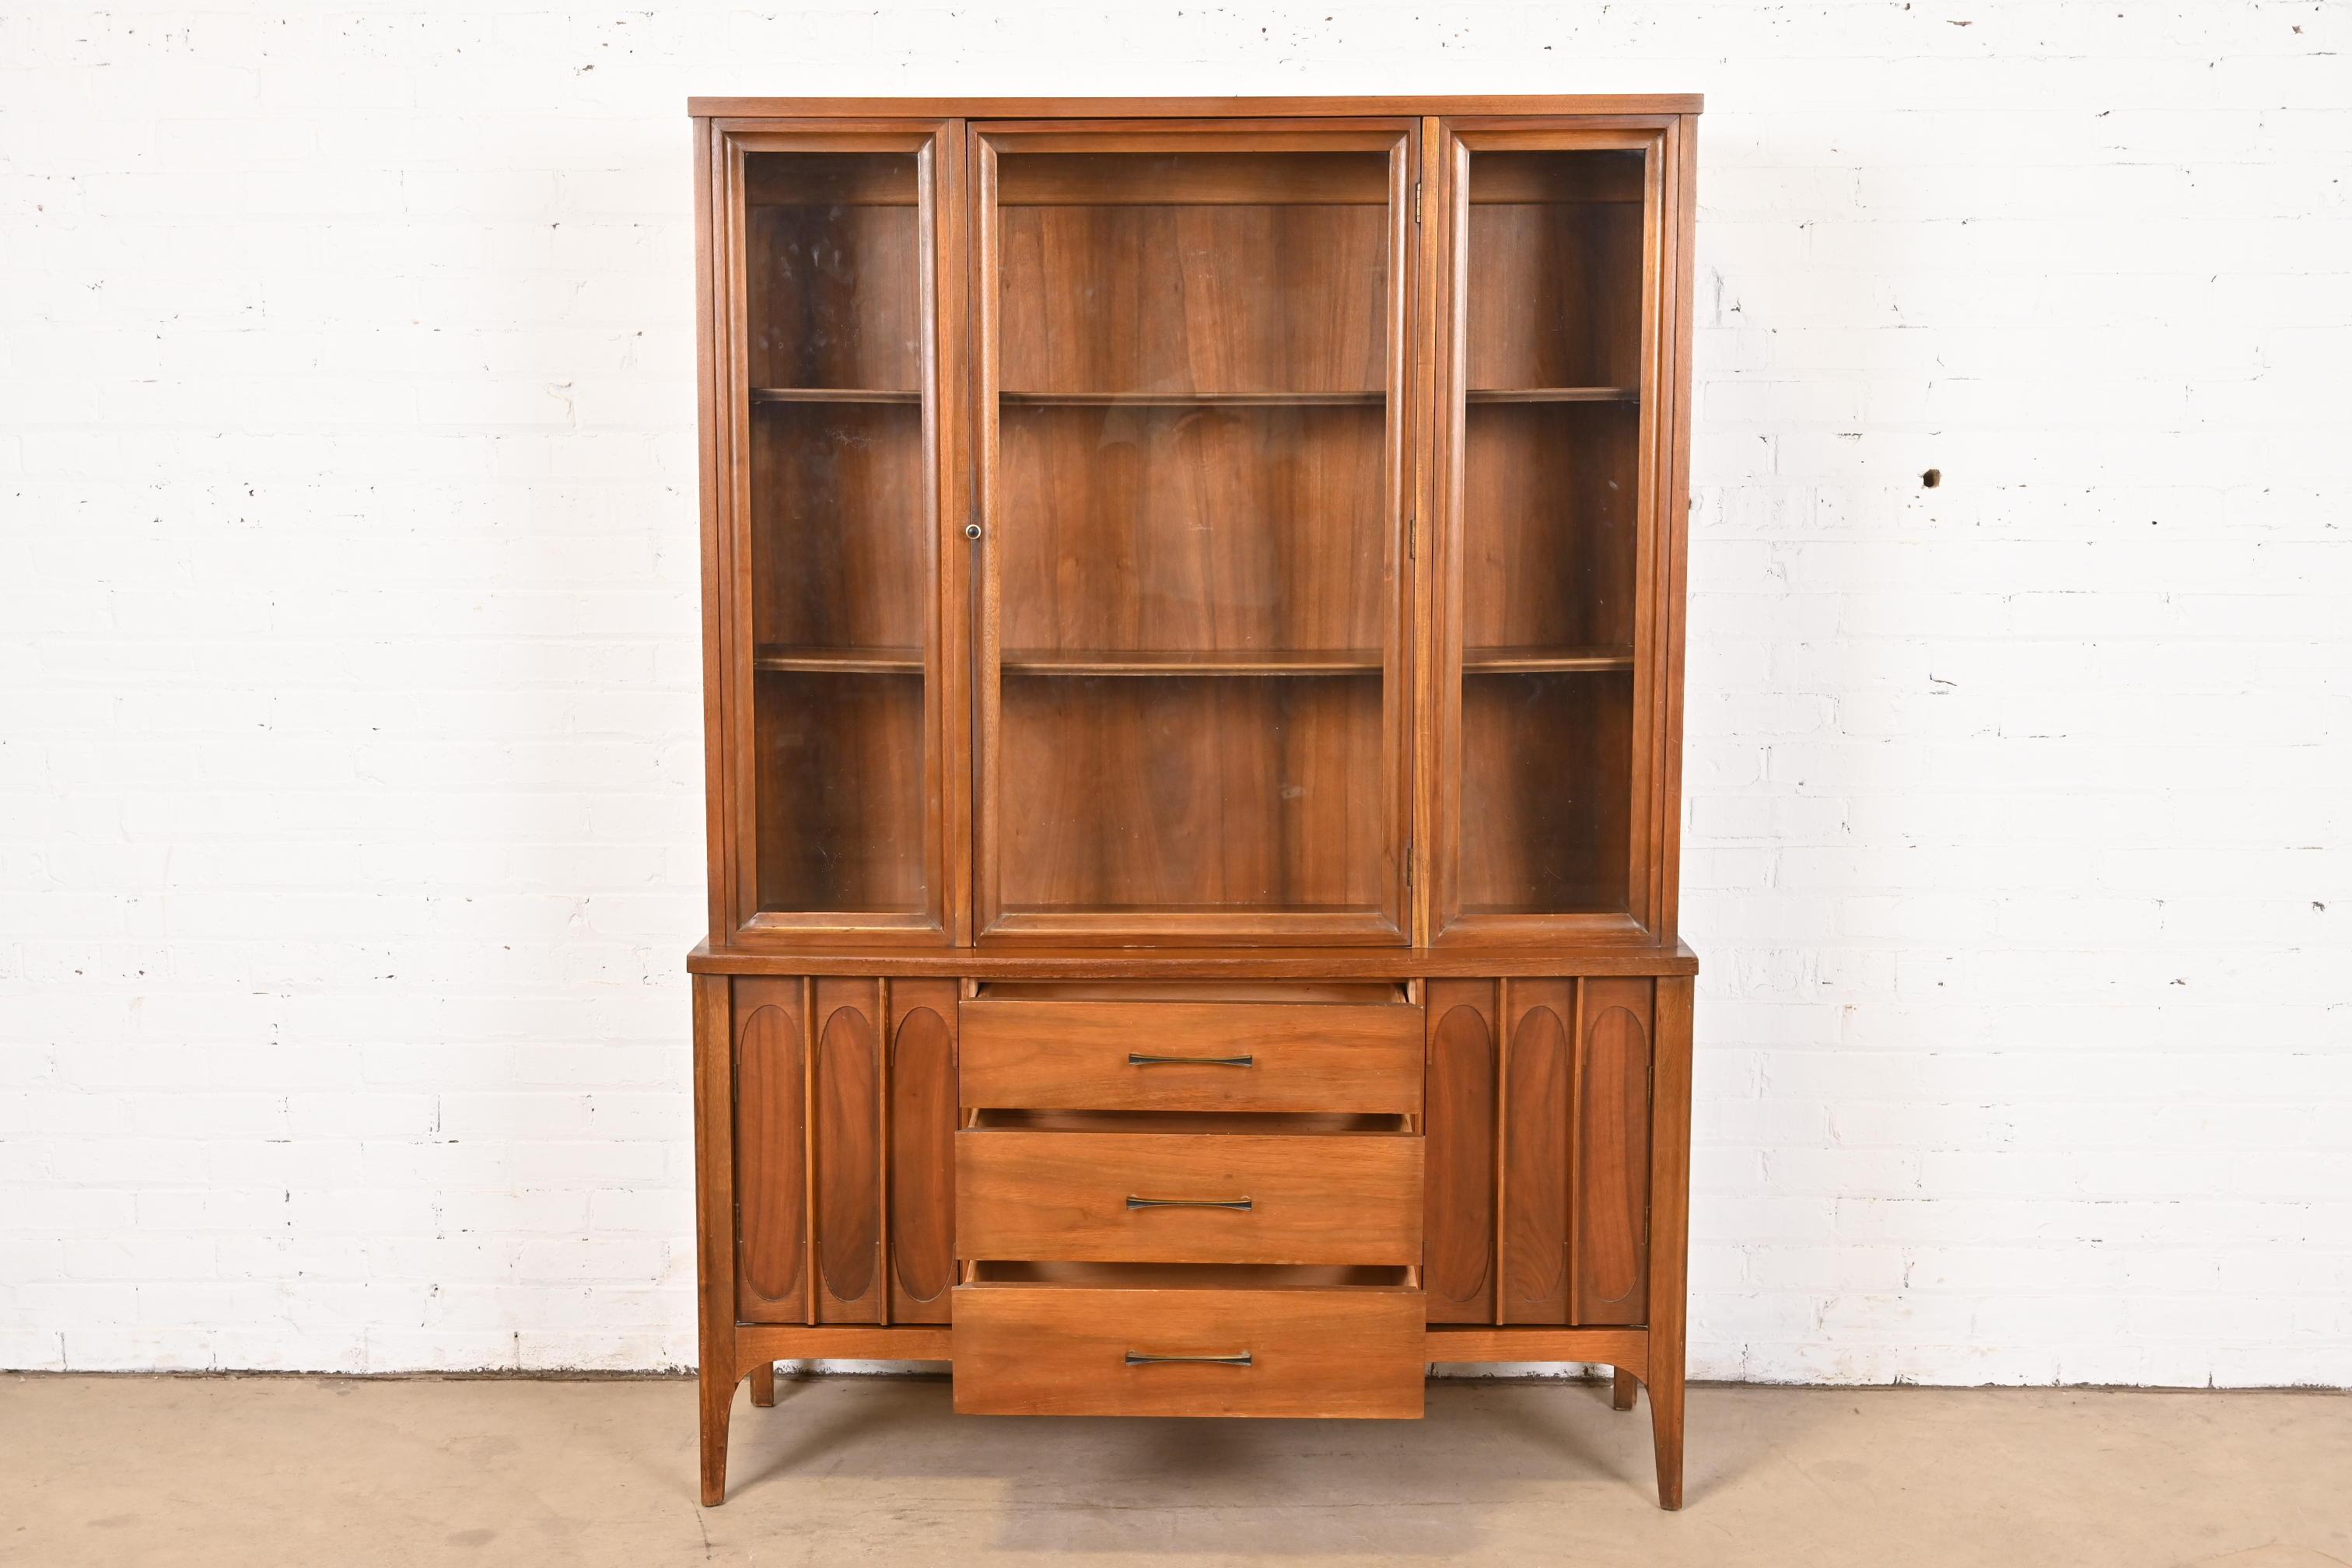 Broyhill Brasilia Style Sculpted Walnut Breakfront Bookcase or China Cabinet 4